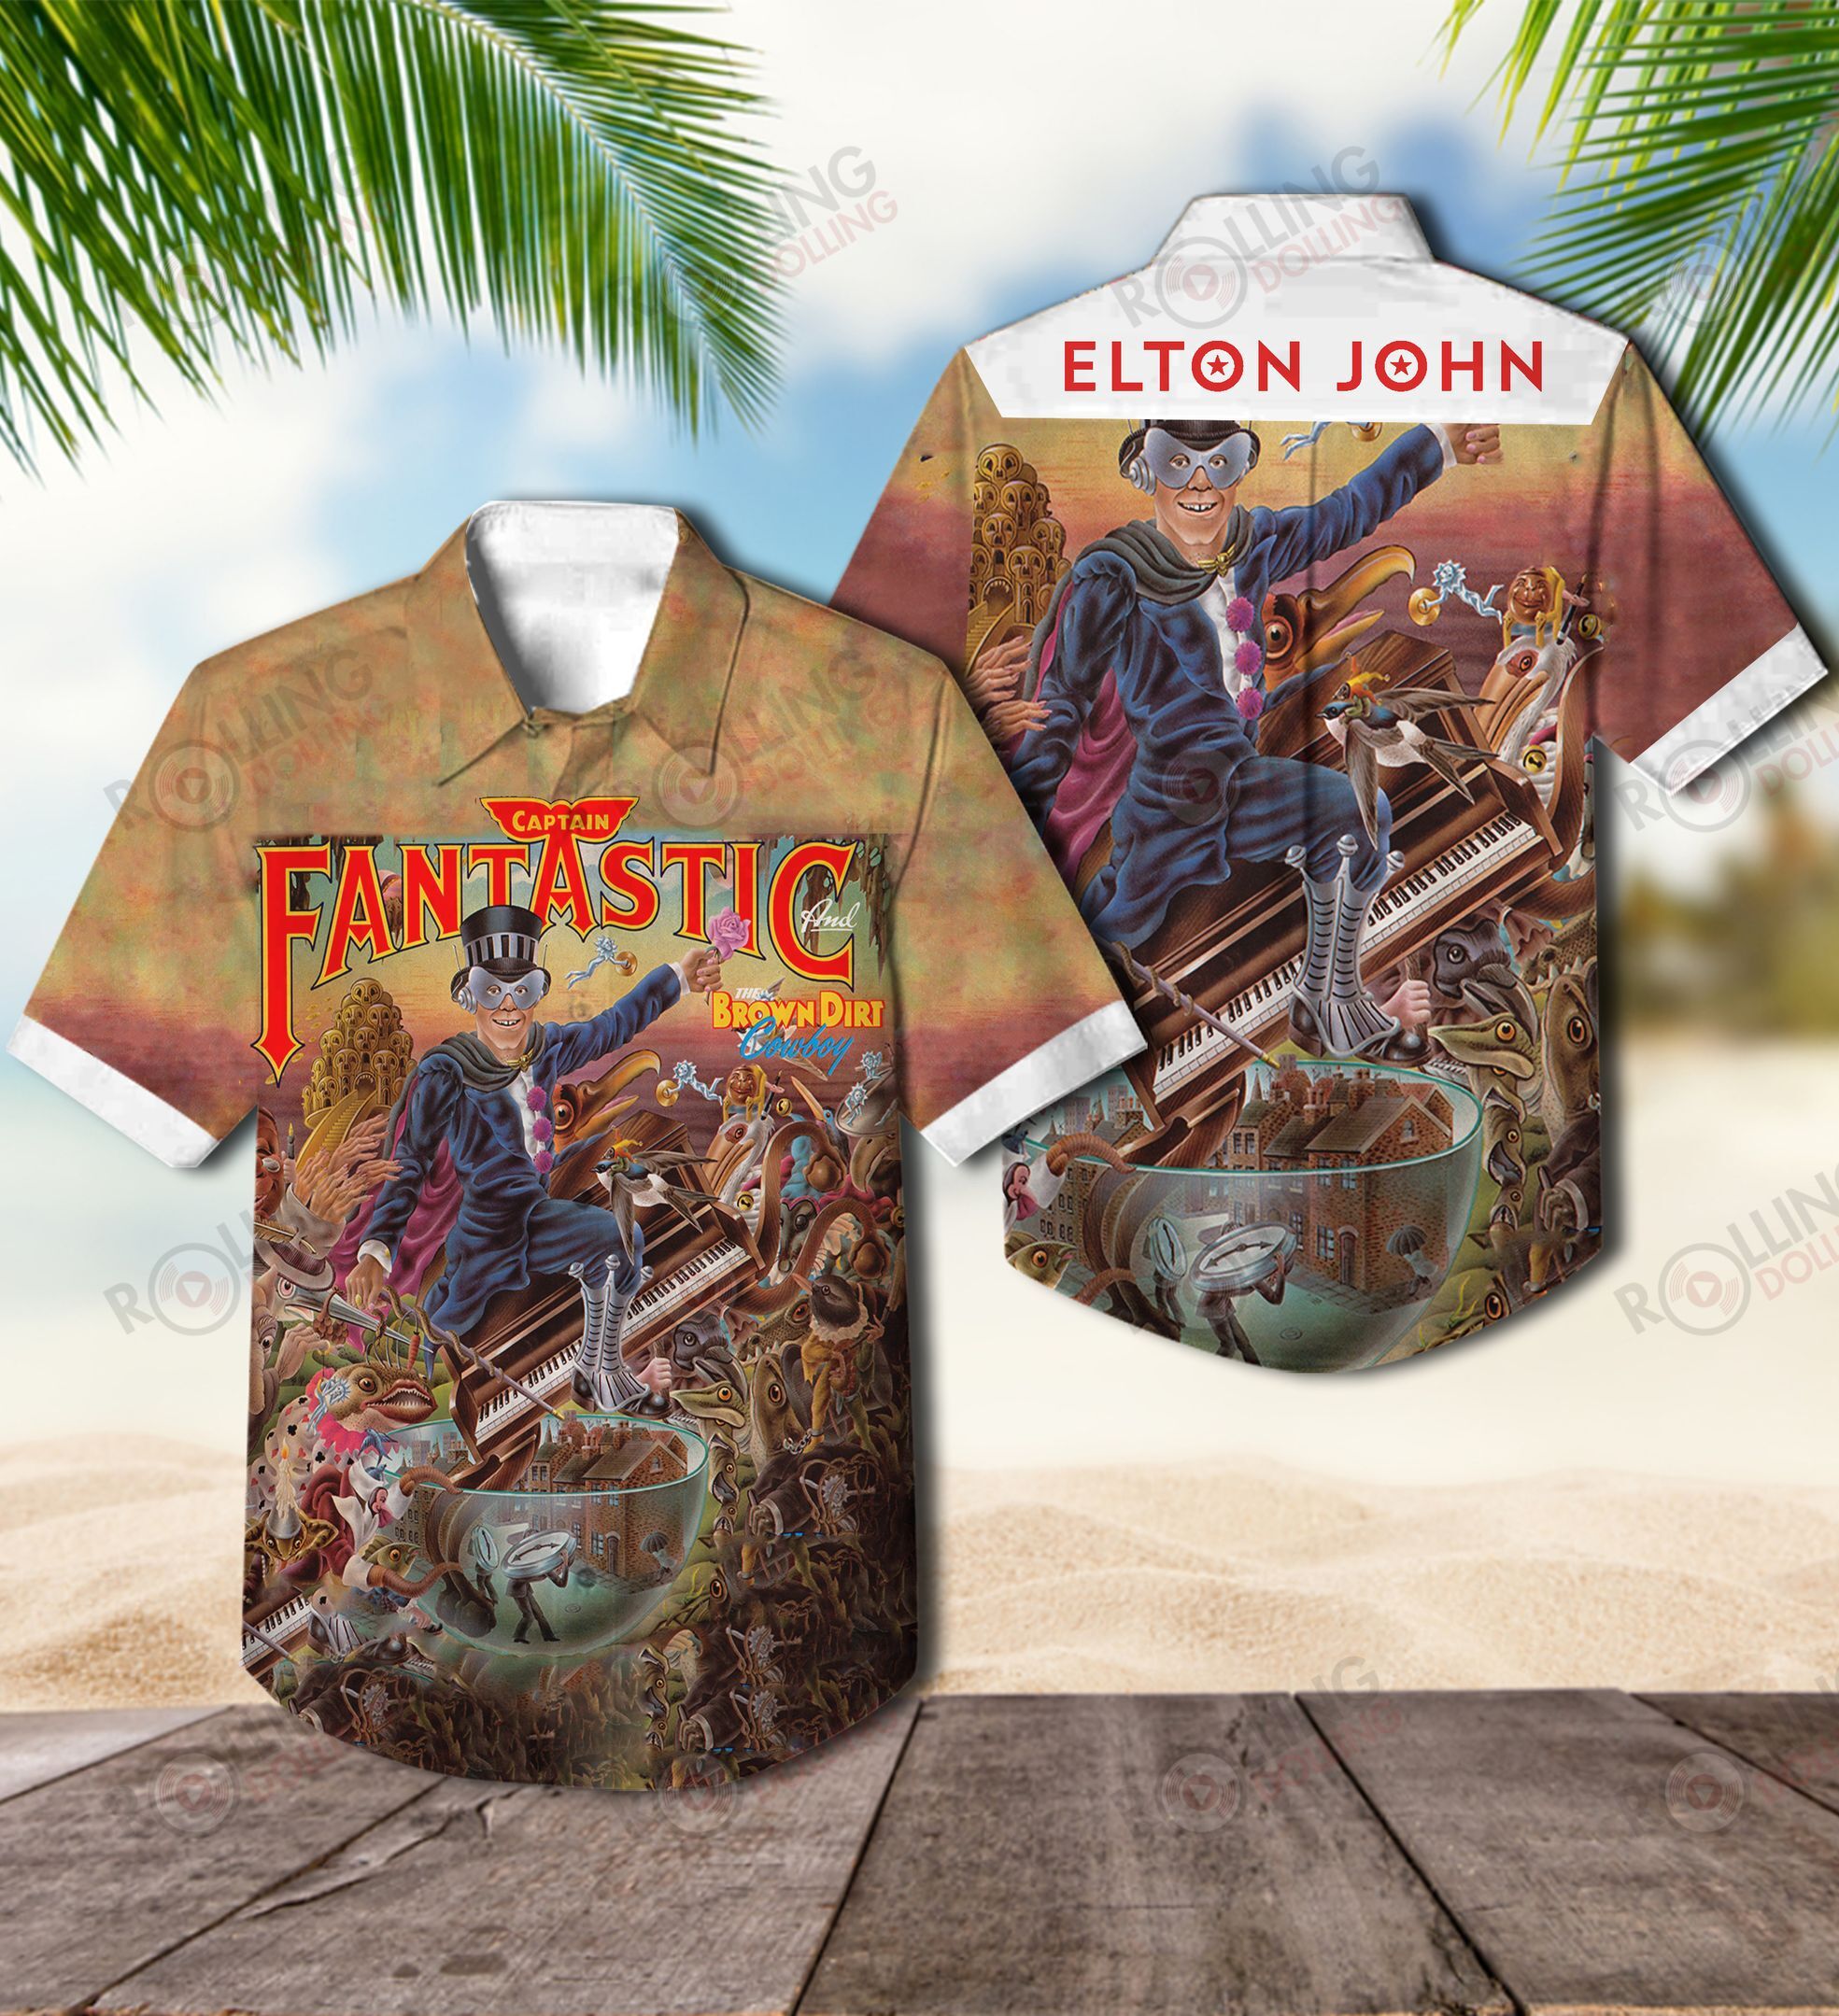 For summer, consider wearing This Amazing Hawaiian Shirt shirt in our store 46